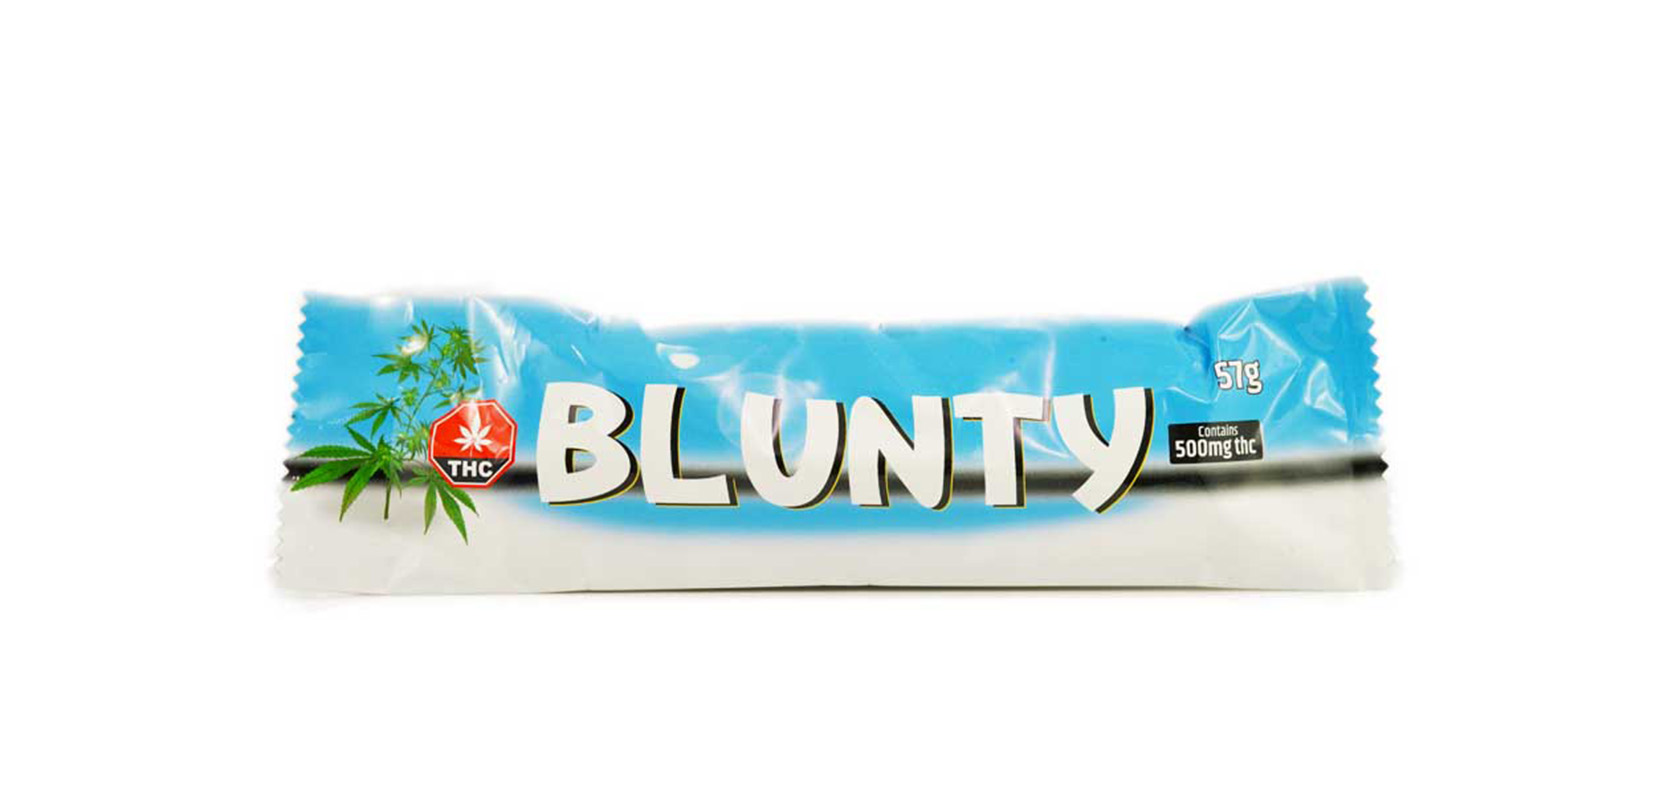 Blunty Edible Chocolate Bar 600mg THC. Buy THC weed chocolate bars. How Edibles Are Different Than Smoking Weed.